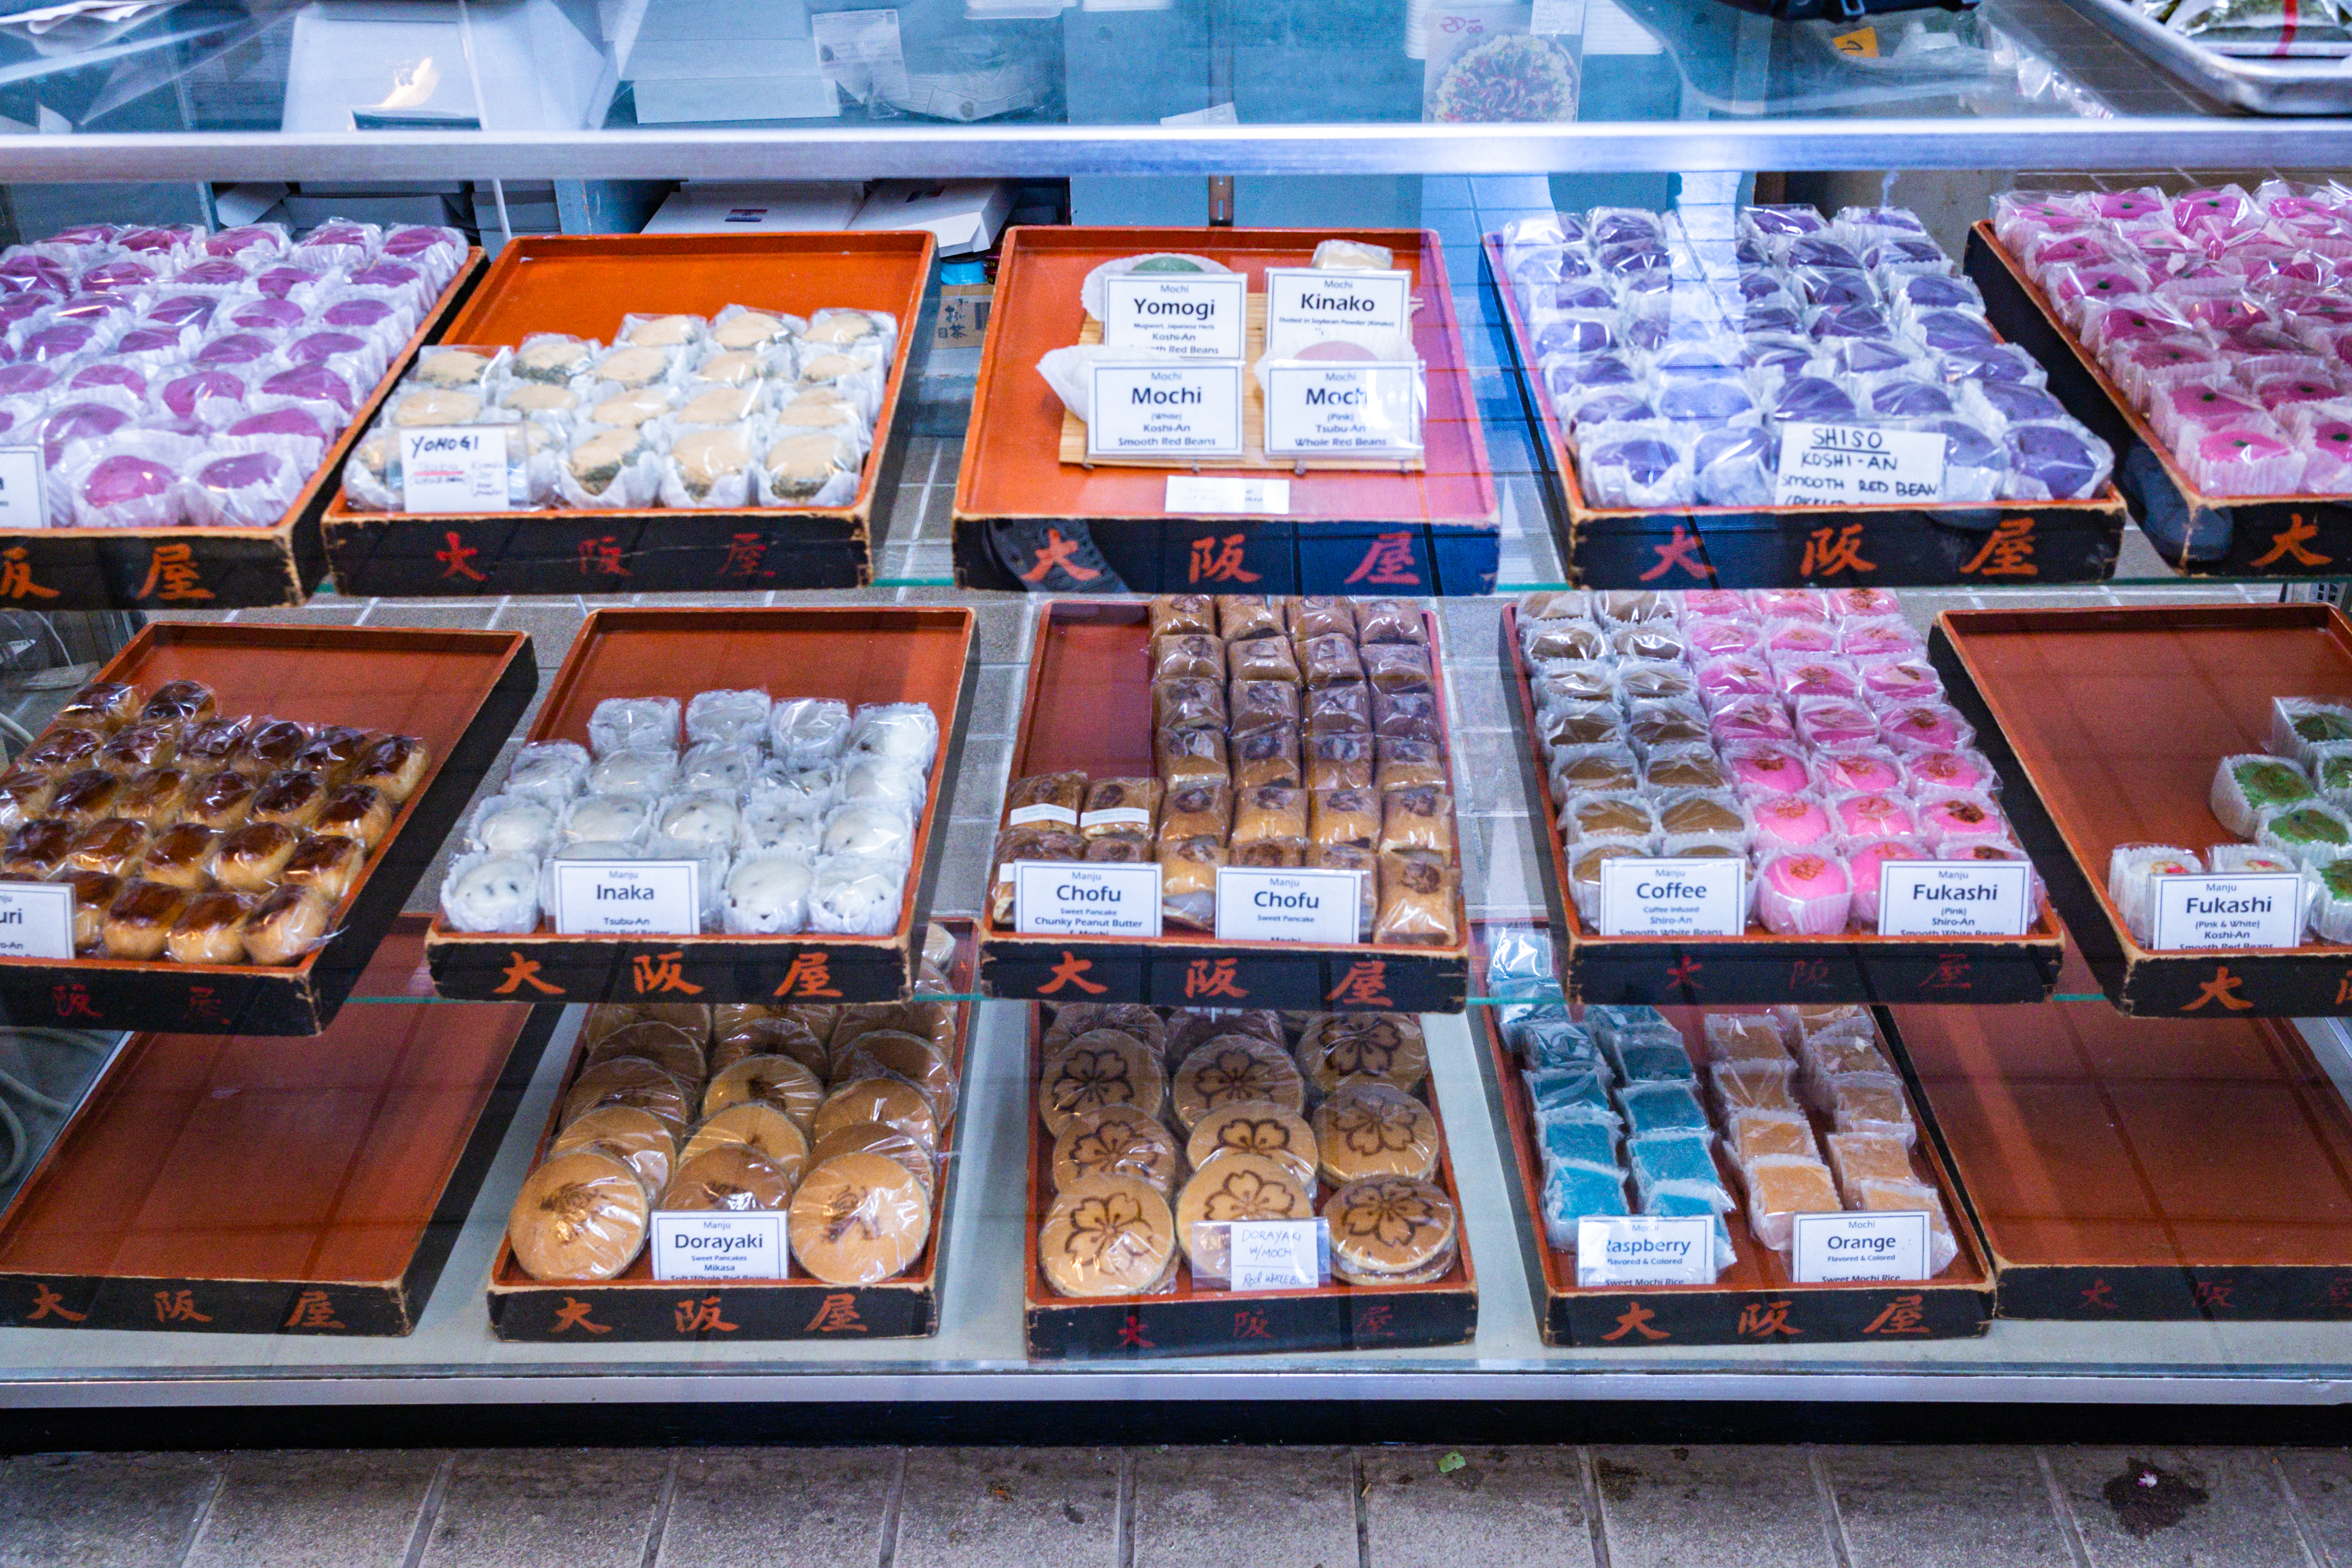 A pastry case filled with colorful wrapped mochi and other treats on trays.